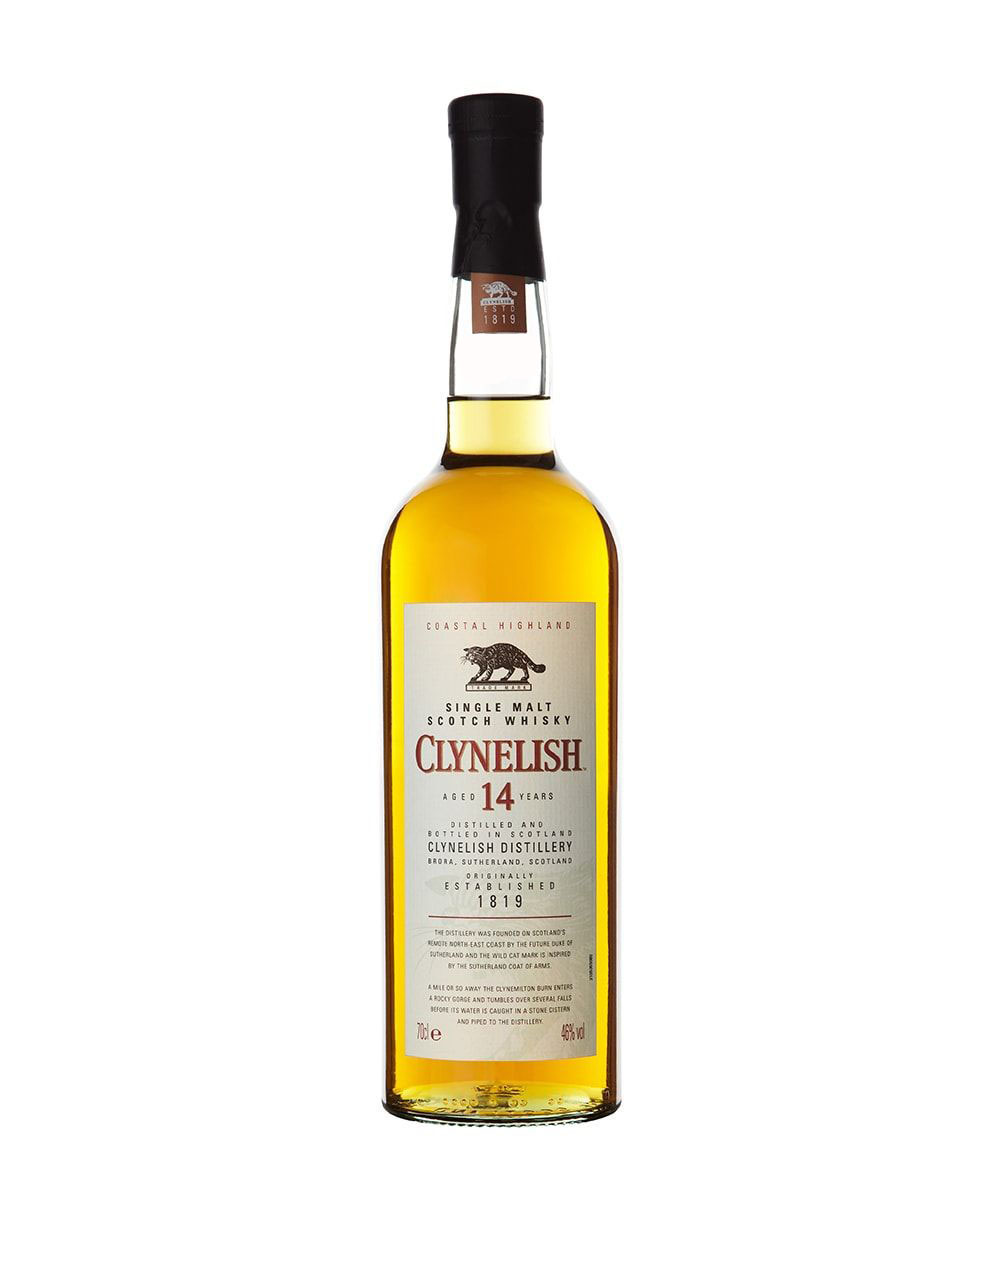 Clynelish 14 Year Old Scotch Whisky